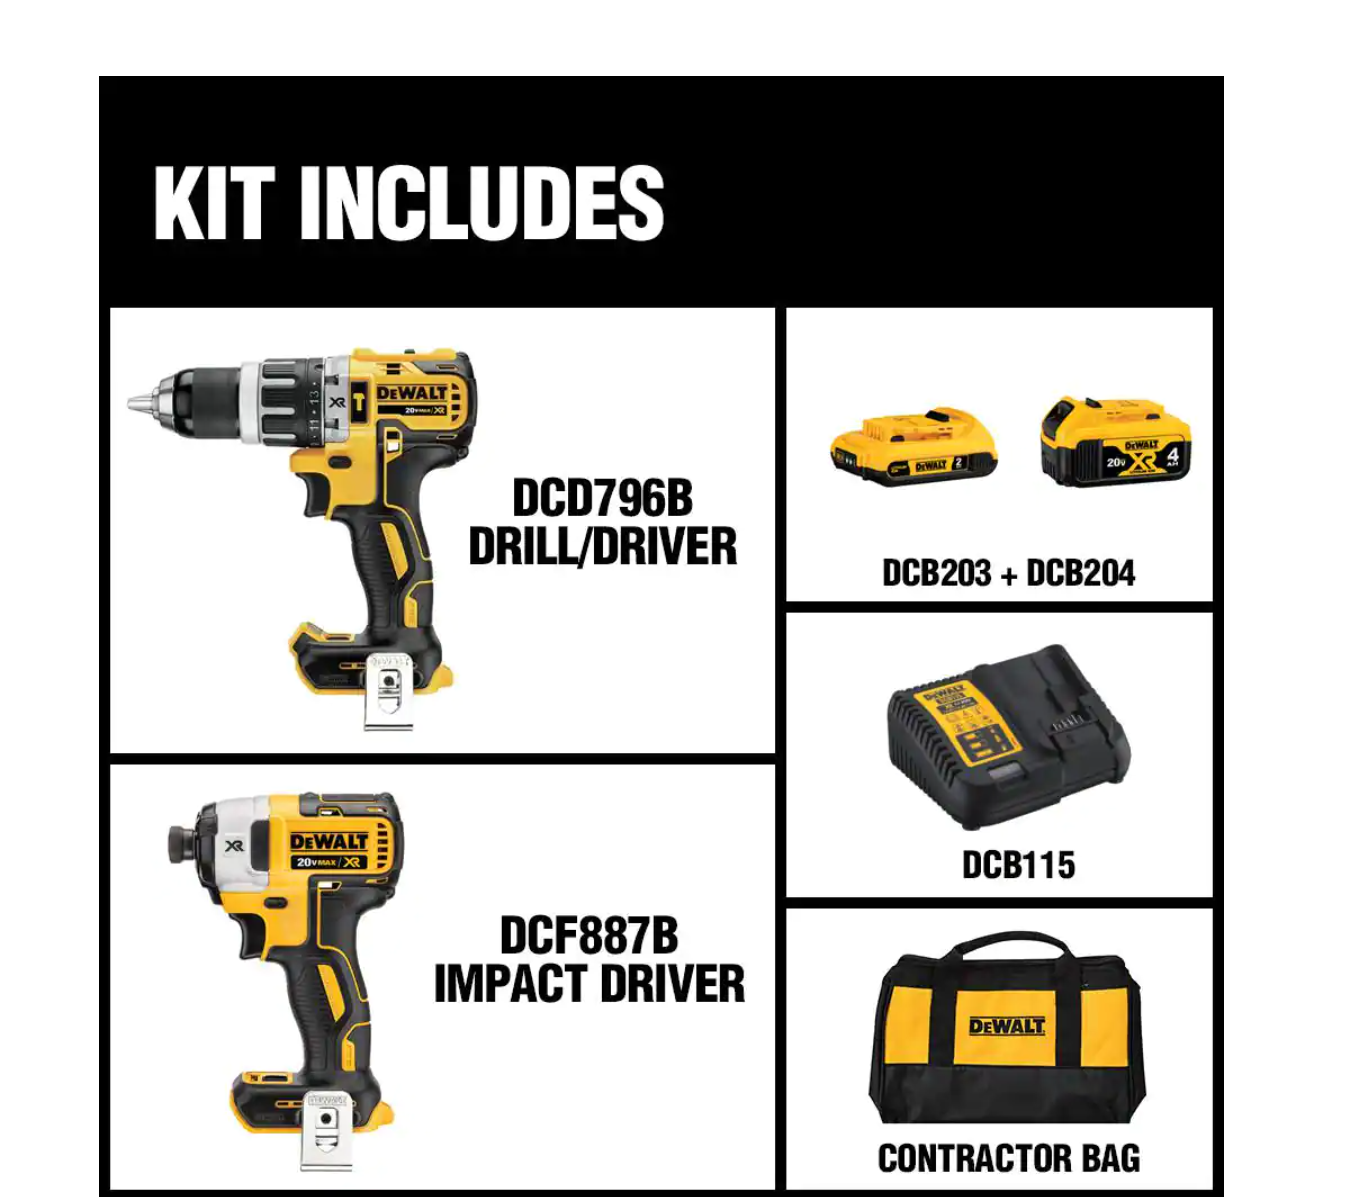 DEWALT 20V MAX Cordless Drill/Impact 2 Tool Combo Kit with (2) 20V 1.3Ah  Batteries, Charger, and Bag DCK240C2 - The Home Depot